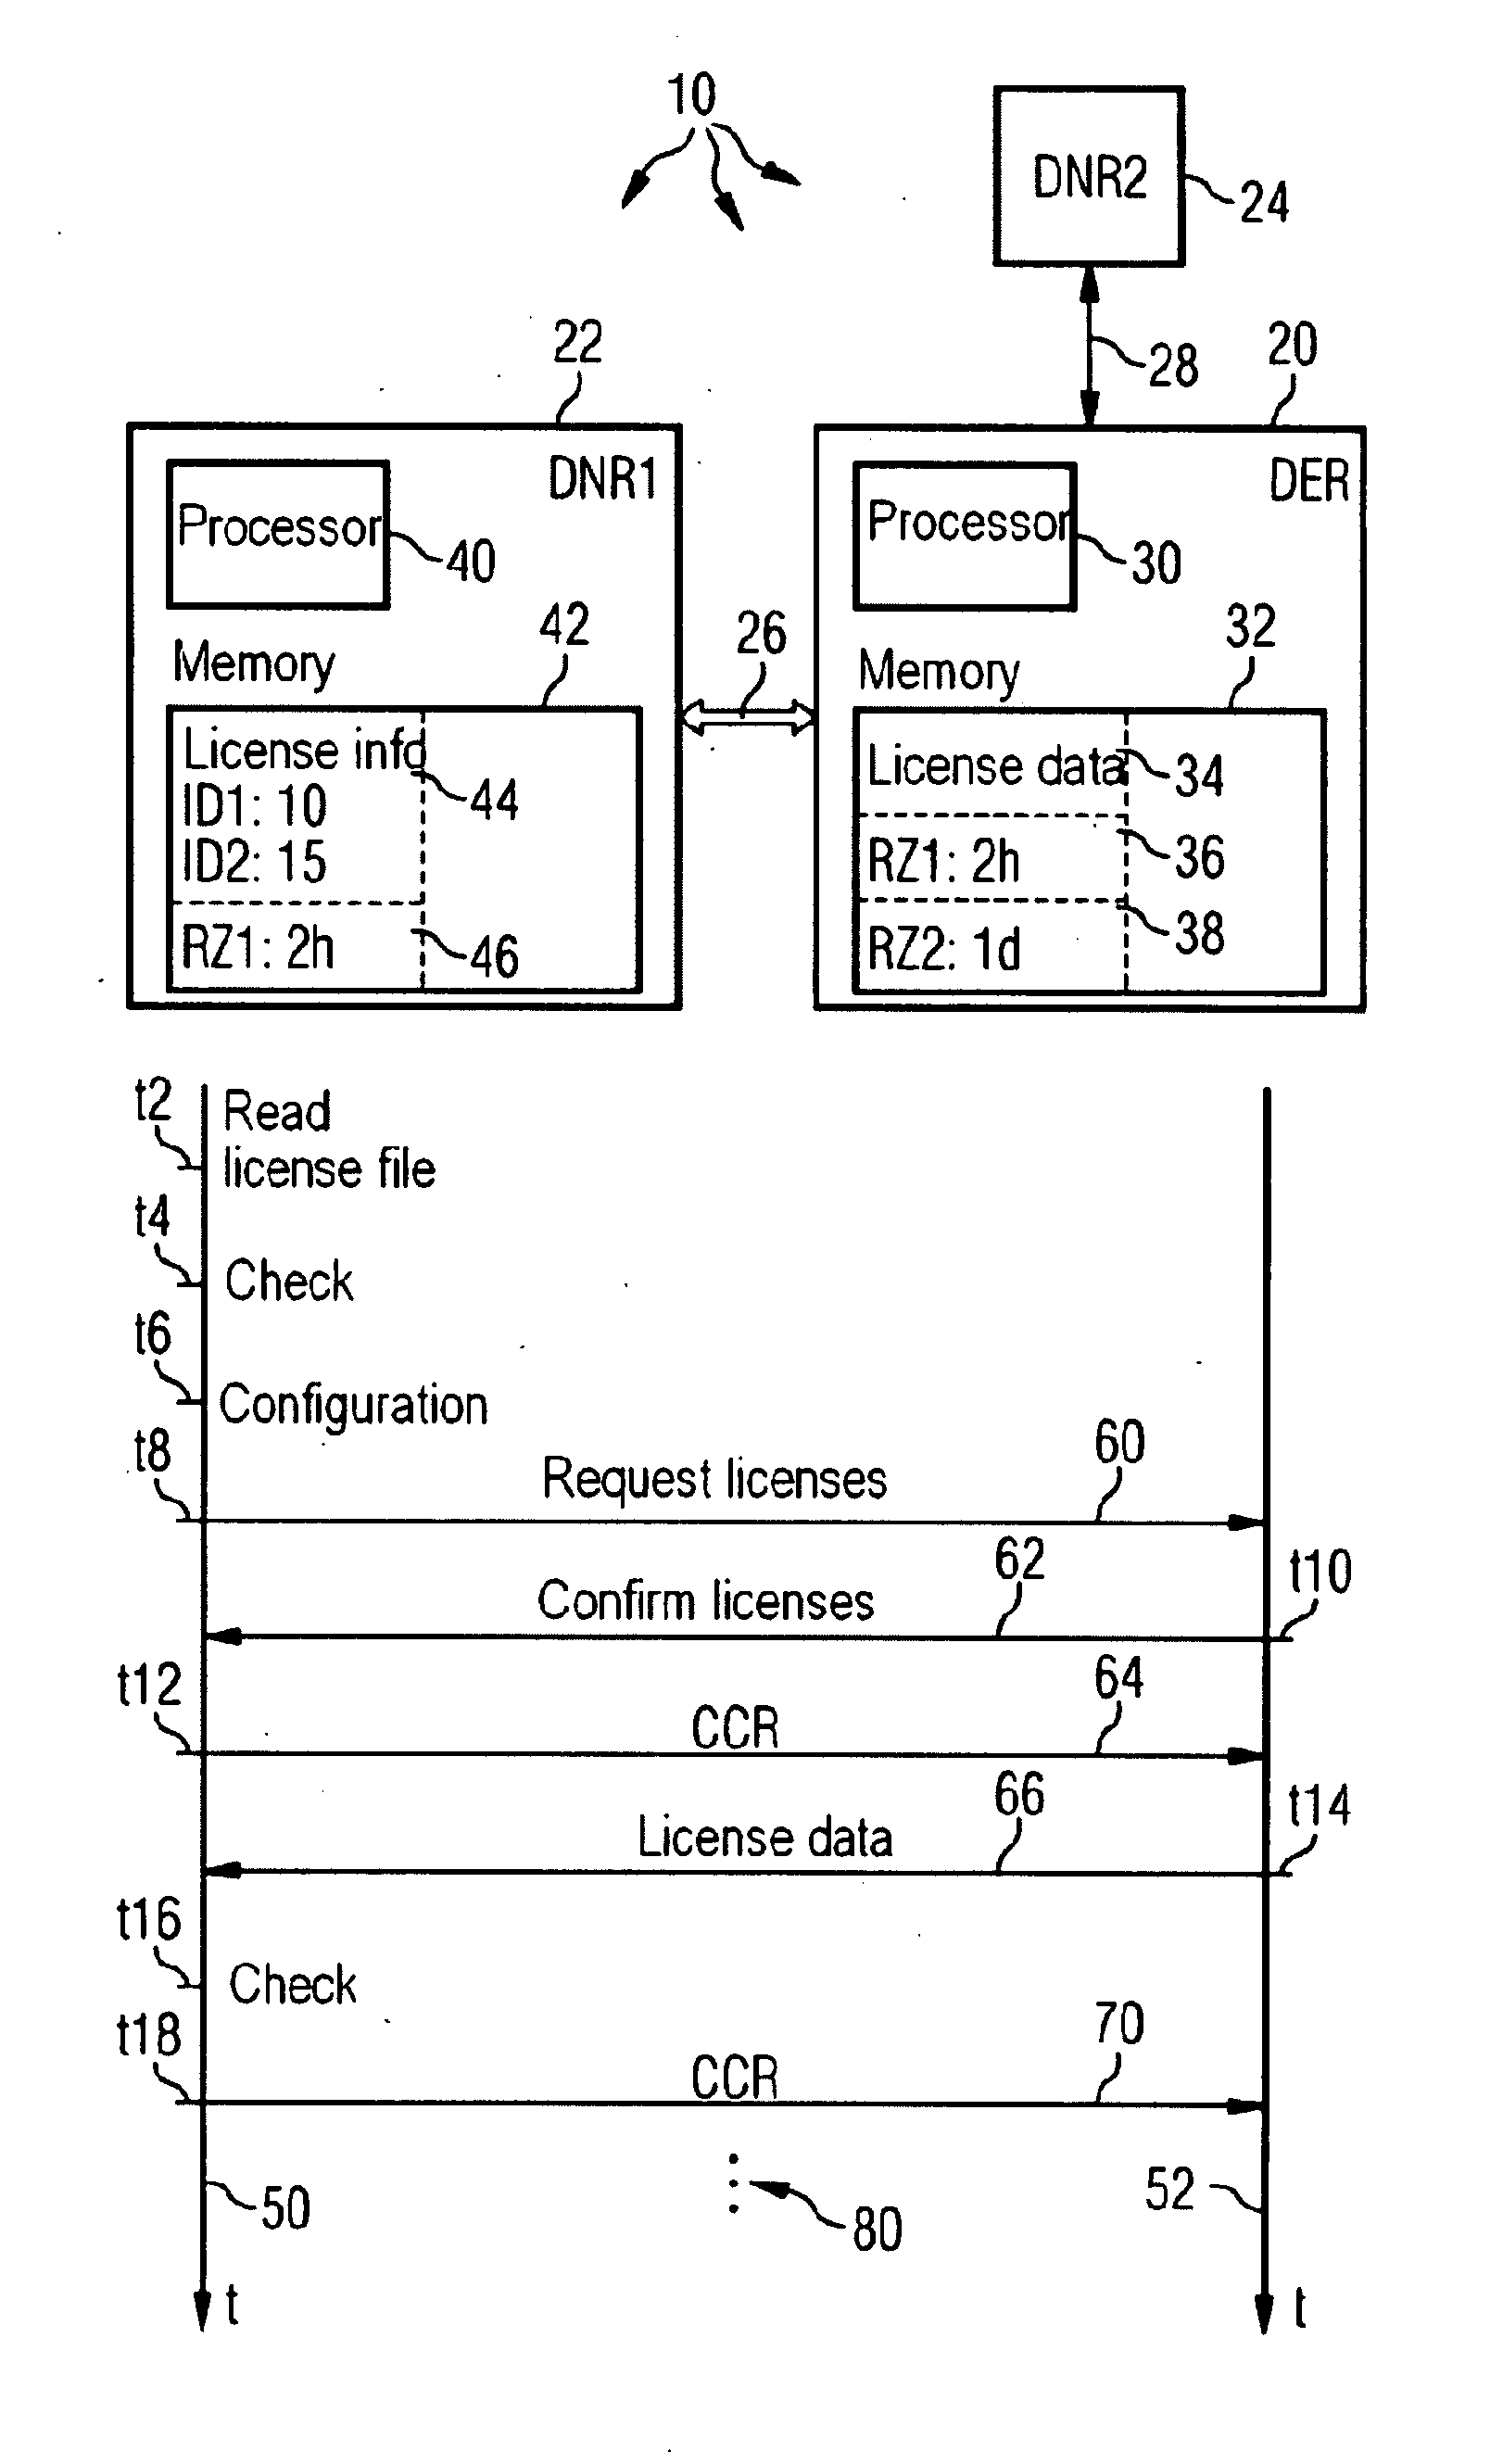 Method for Operating a Data Communications Network Using License Data and Associated Device Network